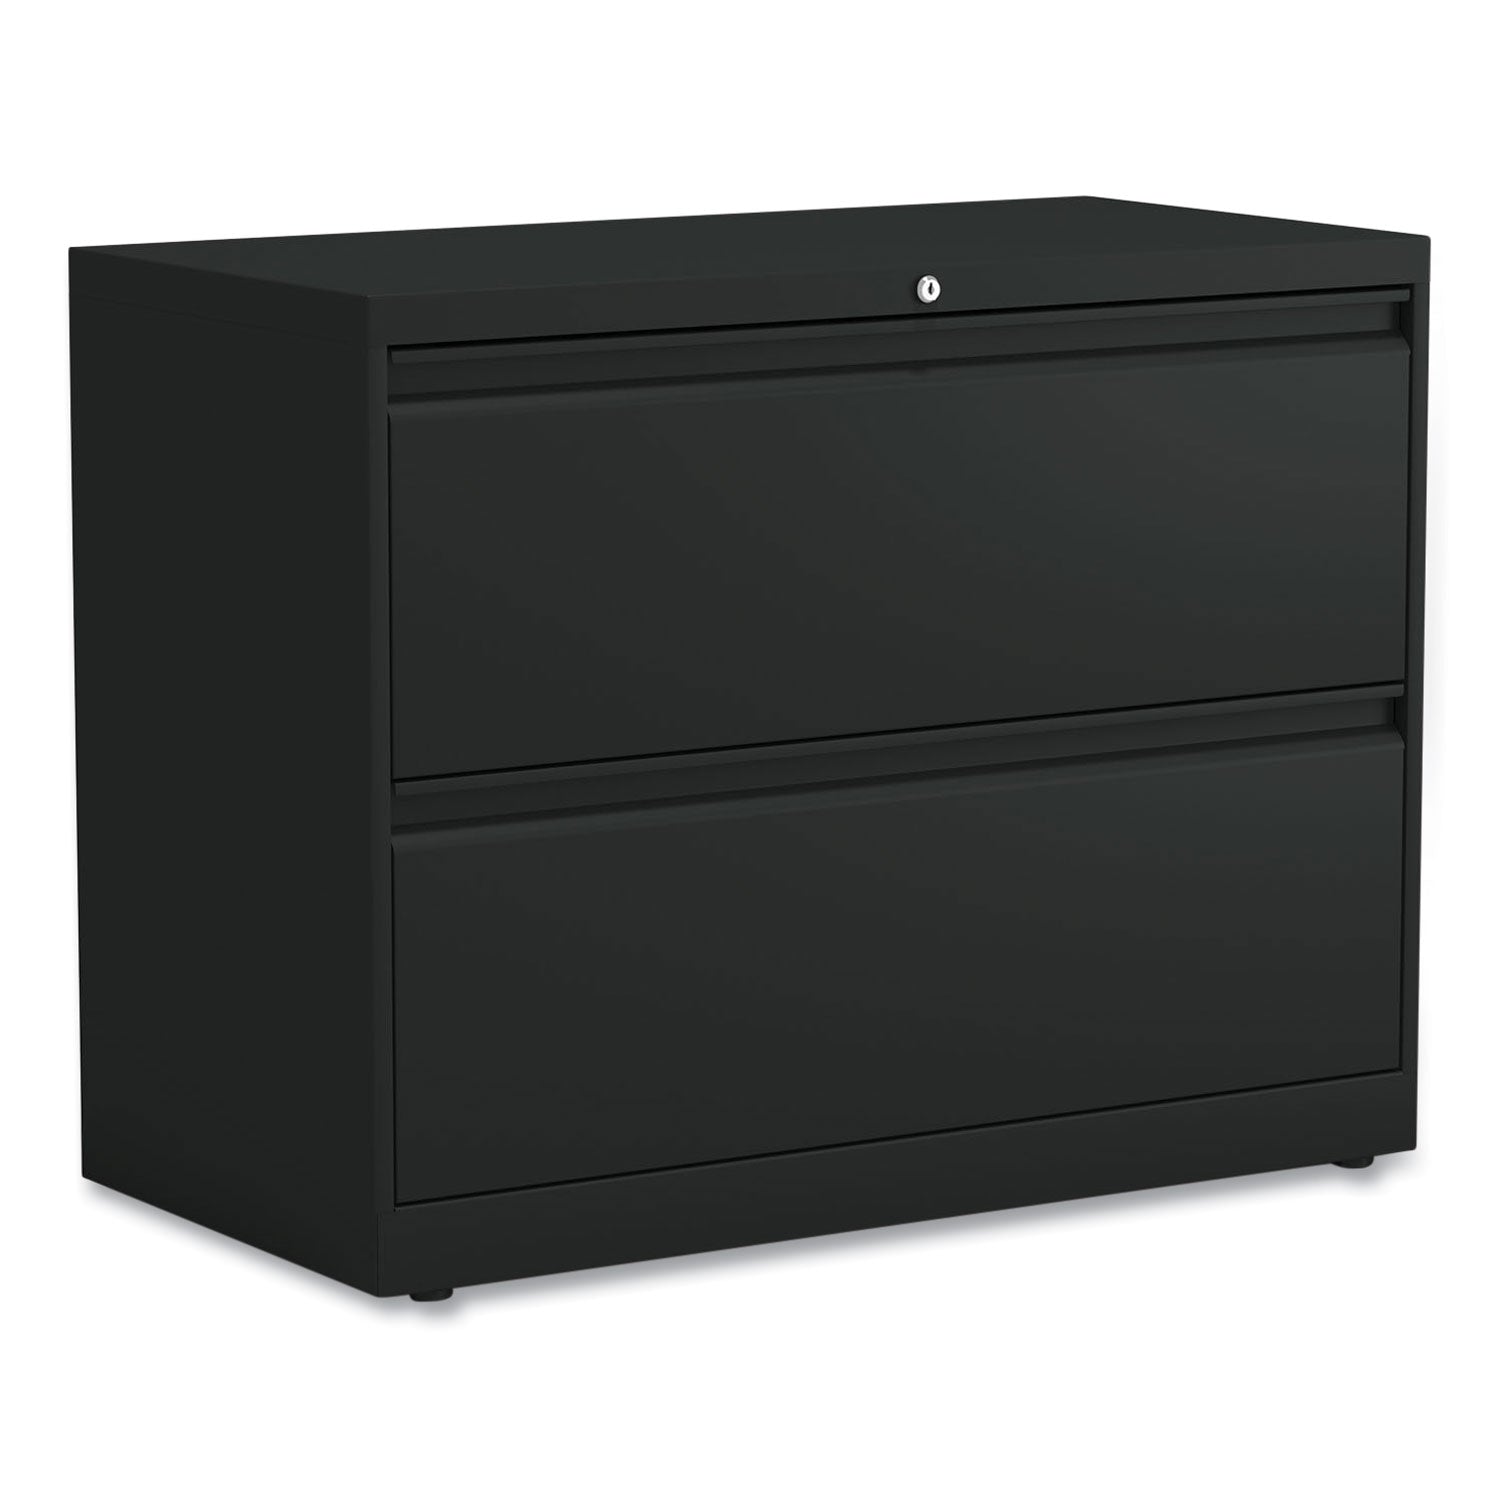 lateral-file-2-legal-letter-size-file-drawers-black-36-x-1863-x-28_alehlf3629bl - 1